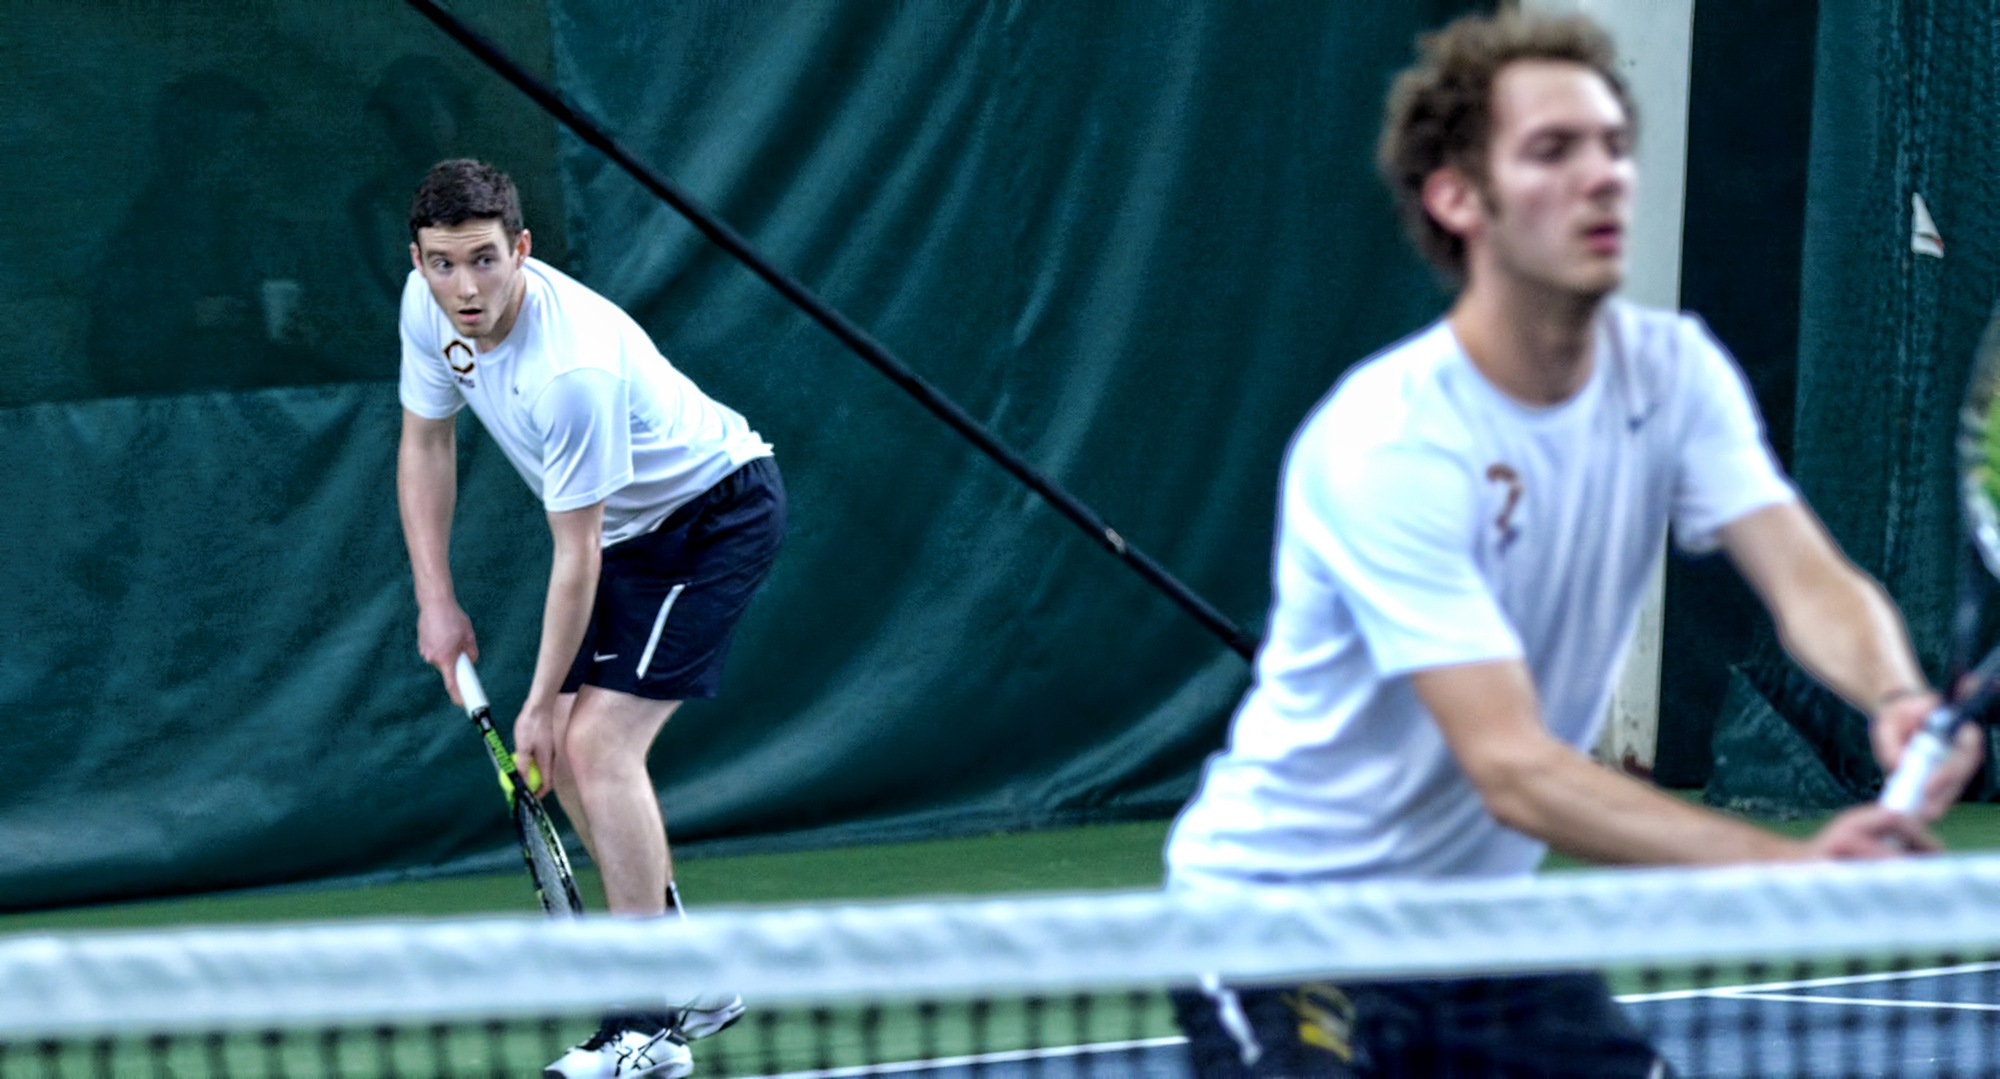 The doubles team of Erik Porter (L) and David Schneck claimed one of the two doubles wins for the Cobbers in the MIAC opener at St. John's.